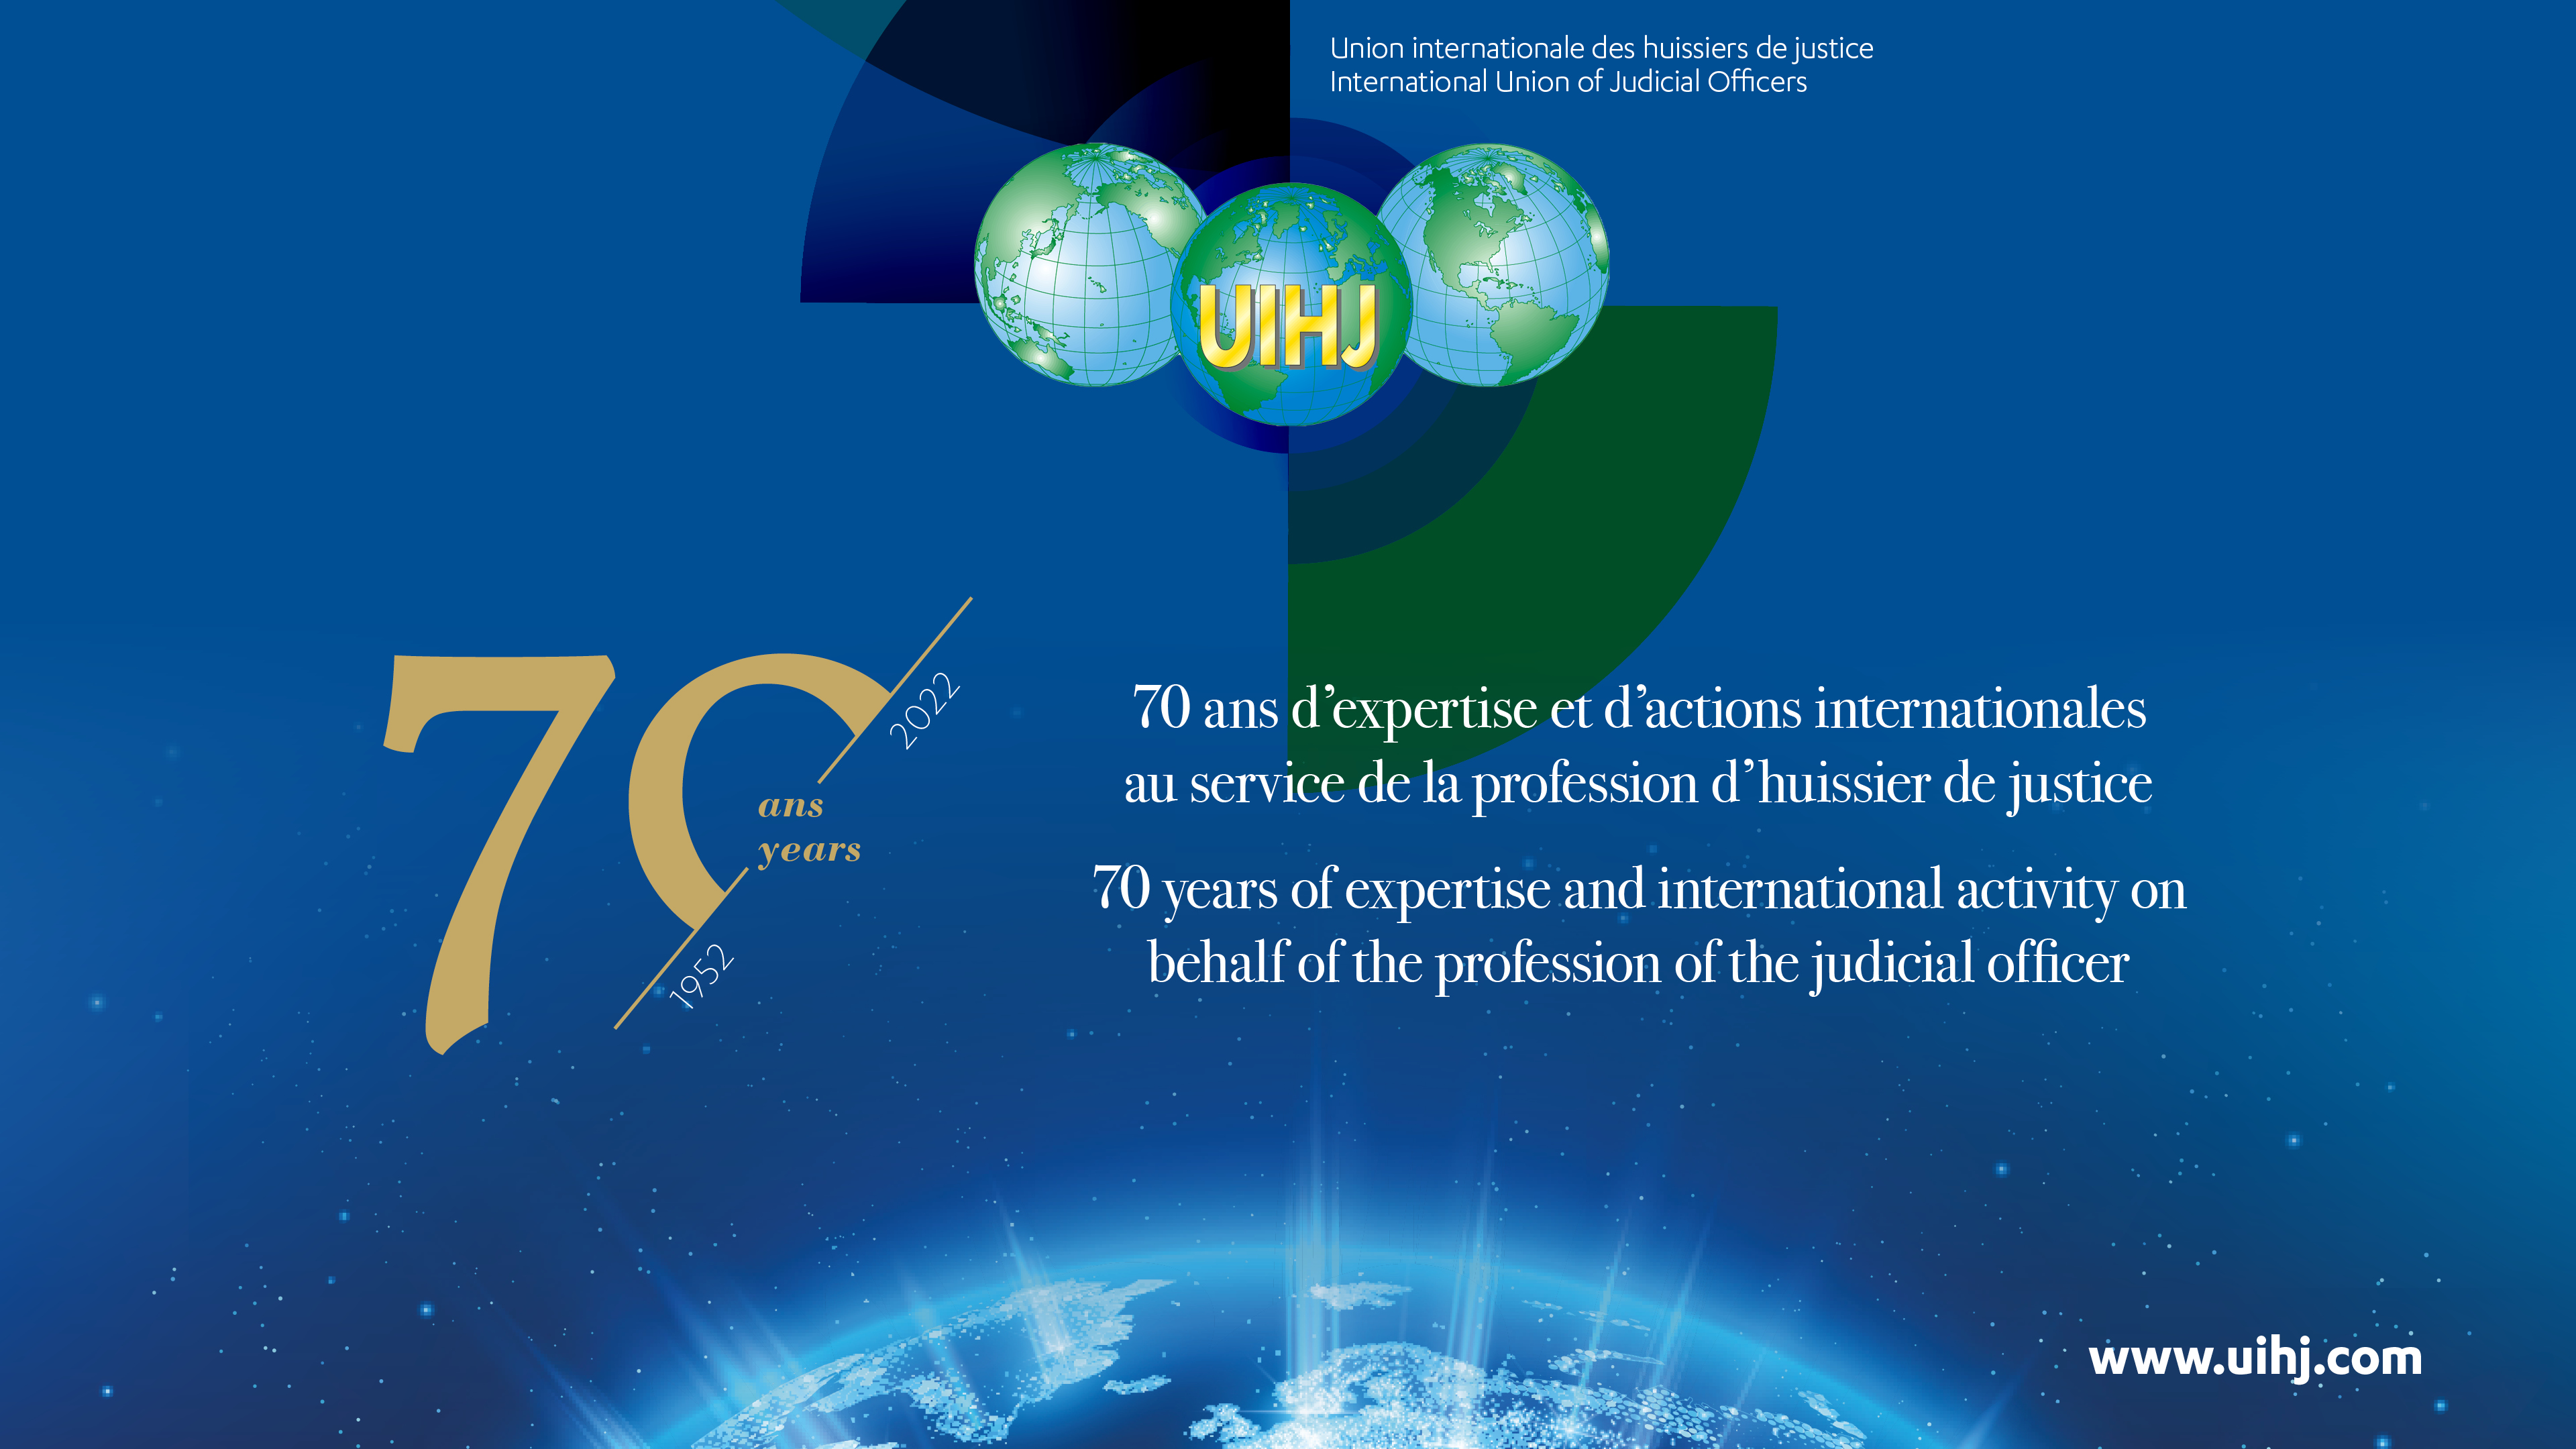 Celebration of the 70th Anniversary of the UIHJ in Paris on November 24, 2022.